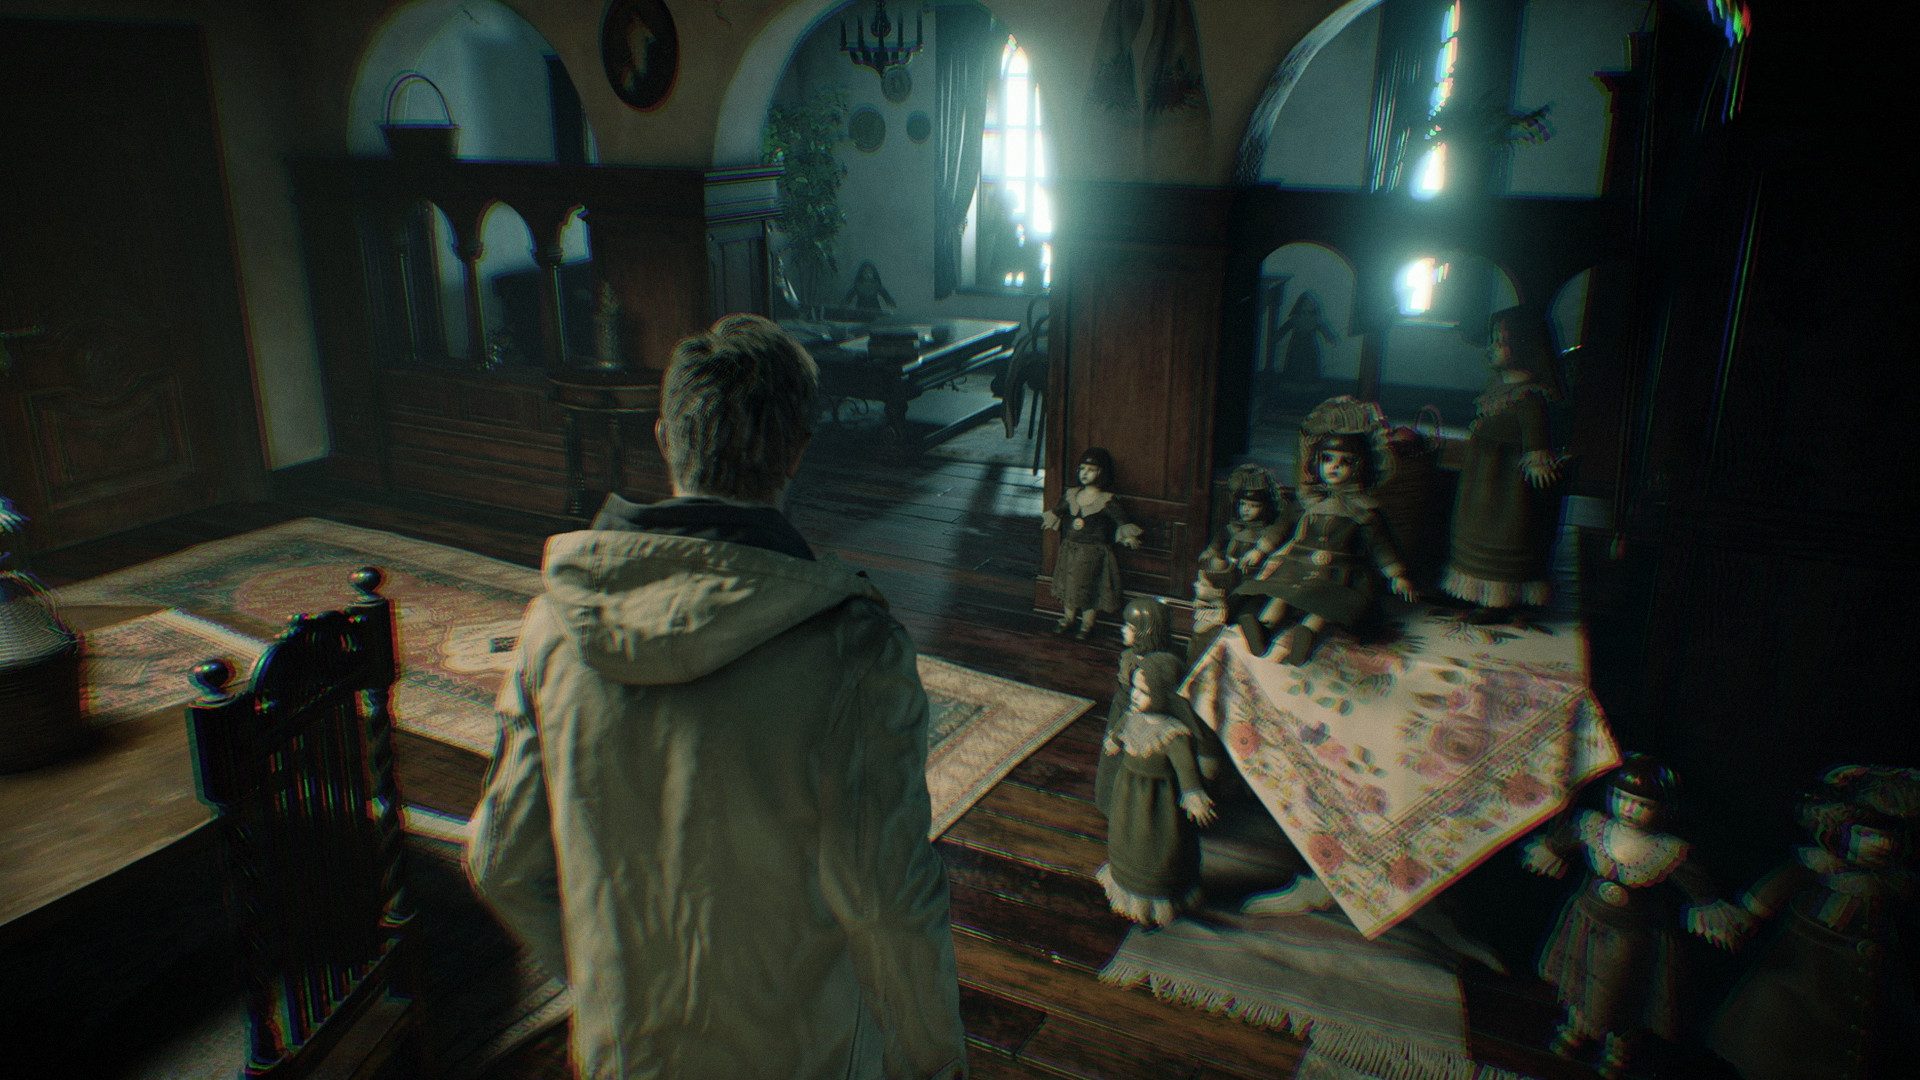 Resident Evil Village release date announced – and you can try it